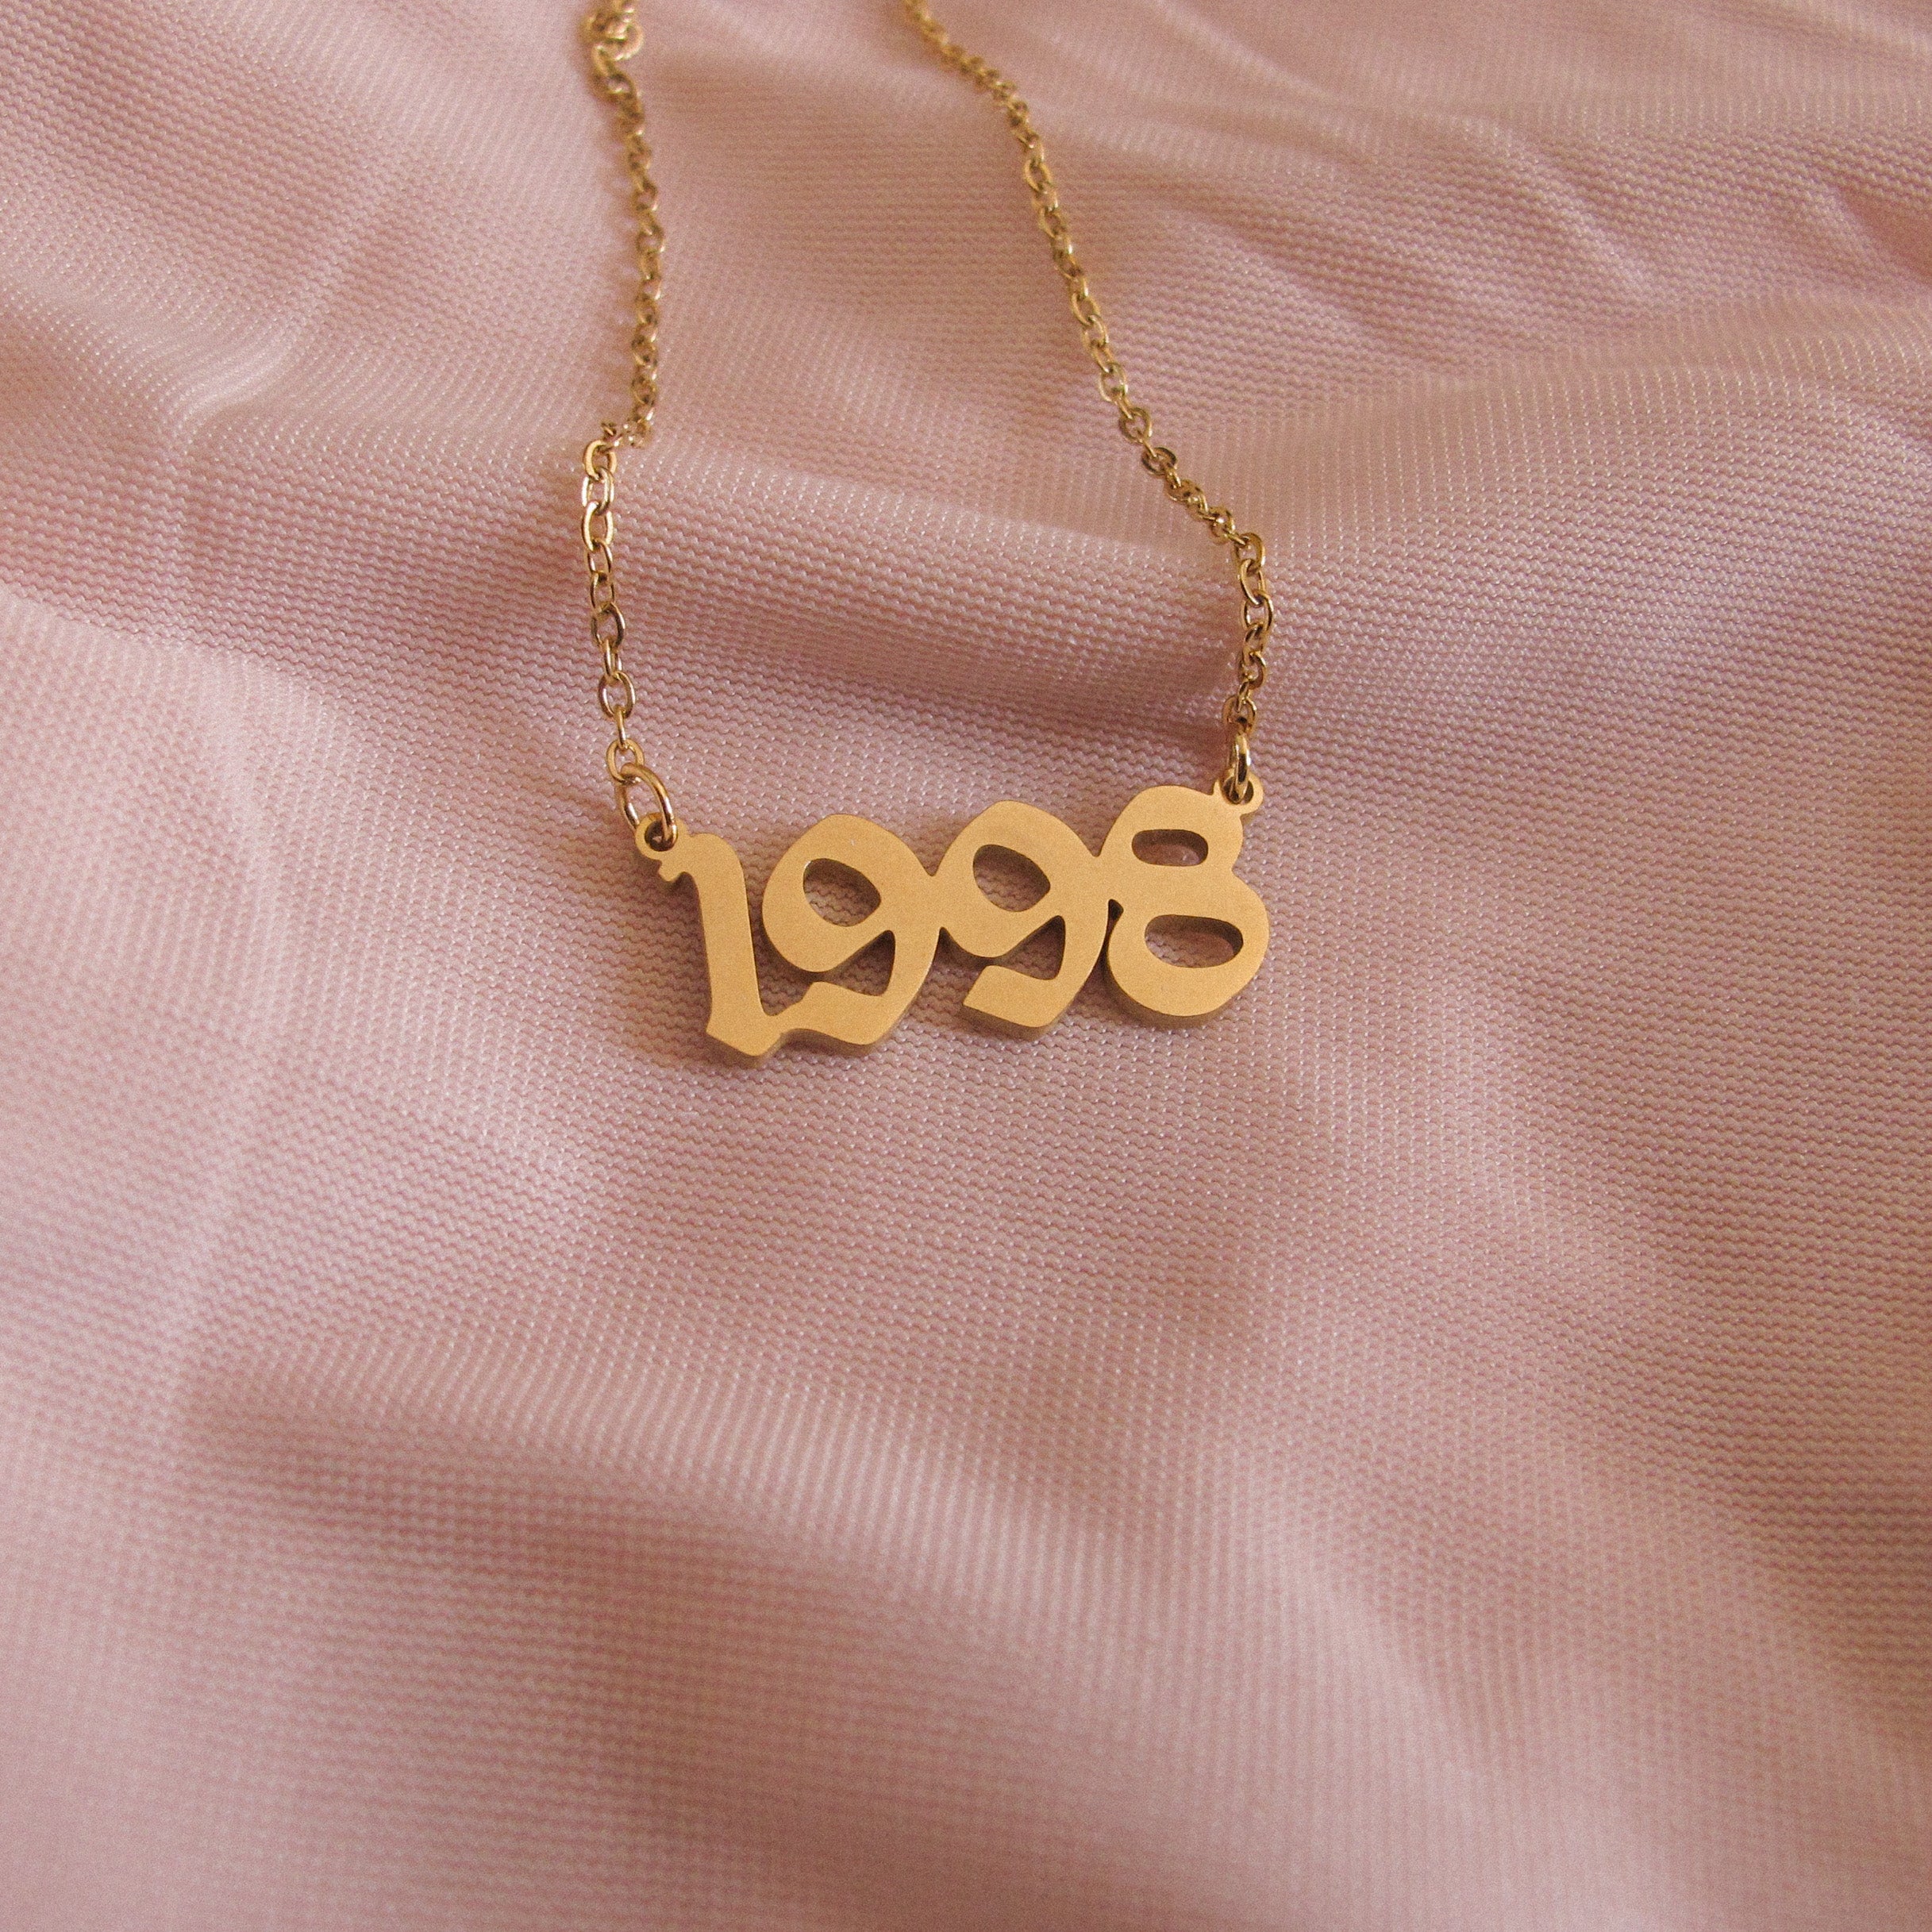 Clearance “90s Baby" Birth Date Necklace